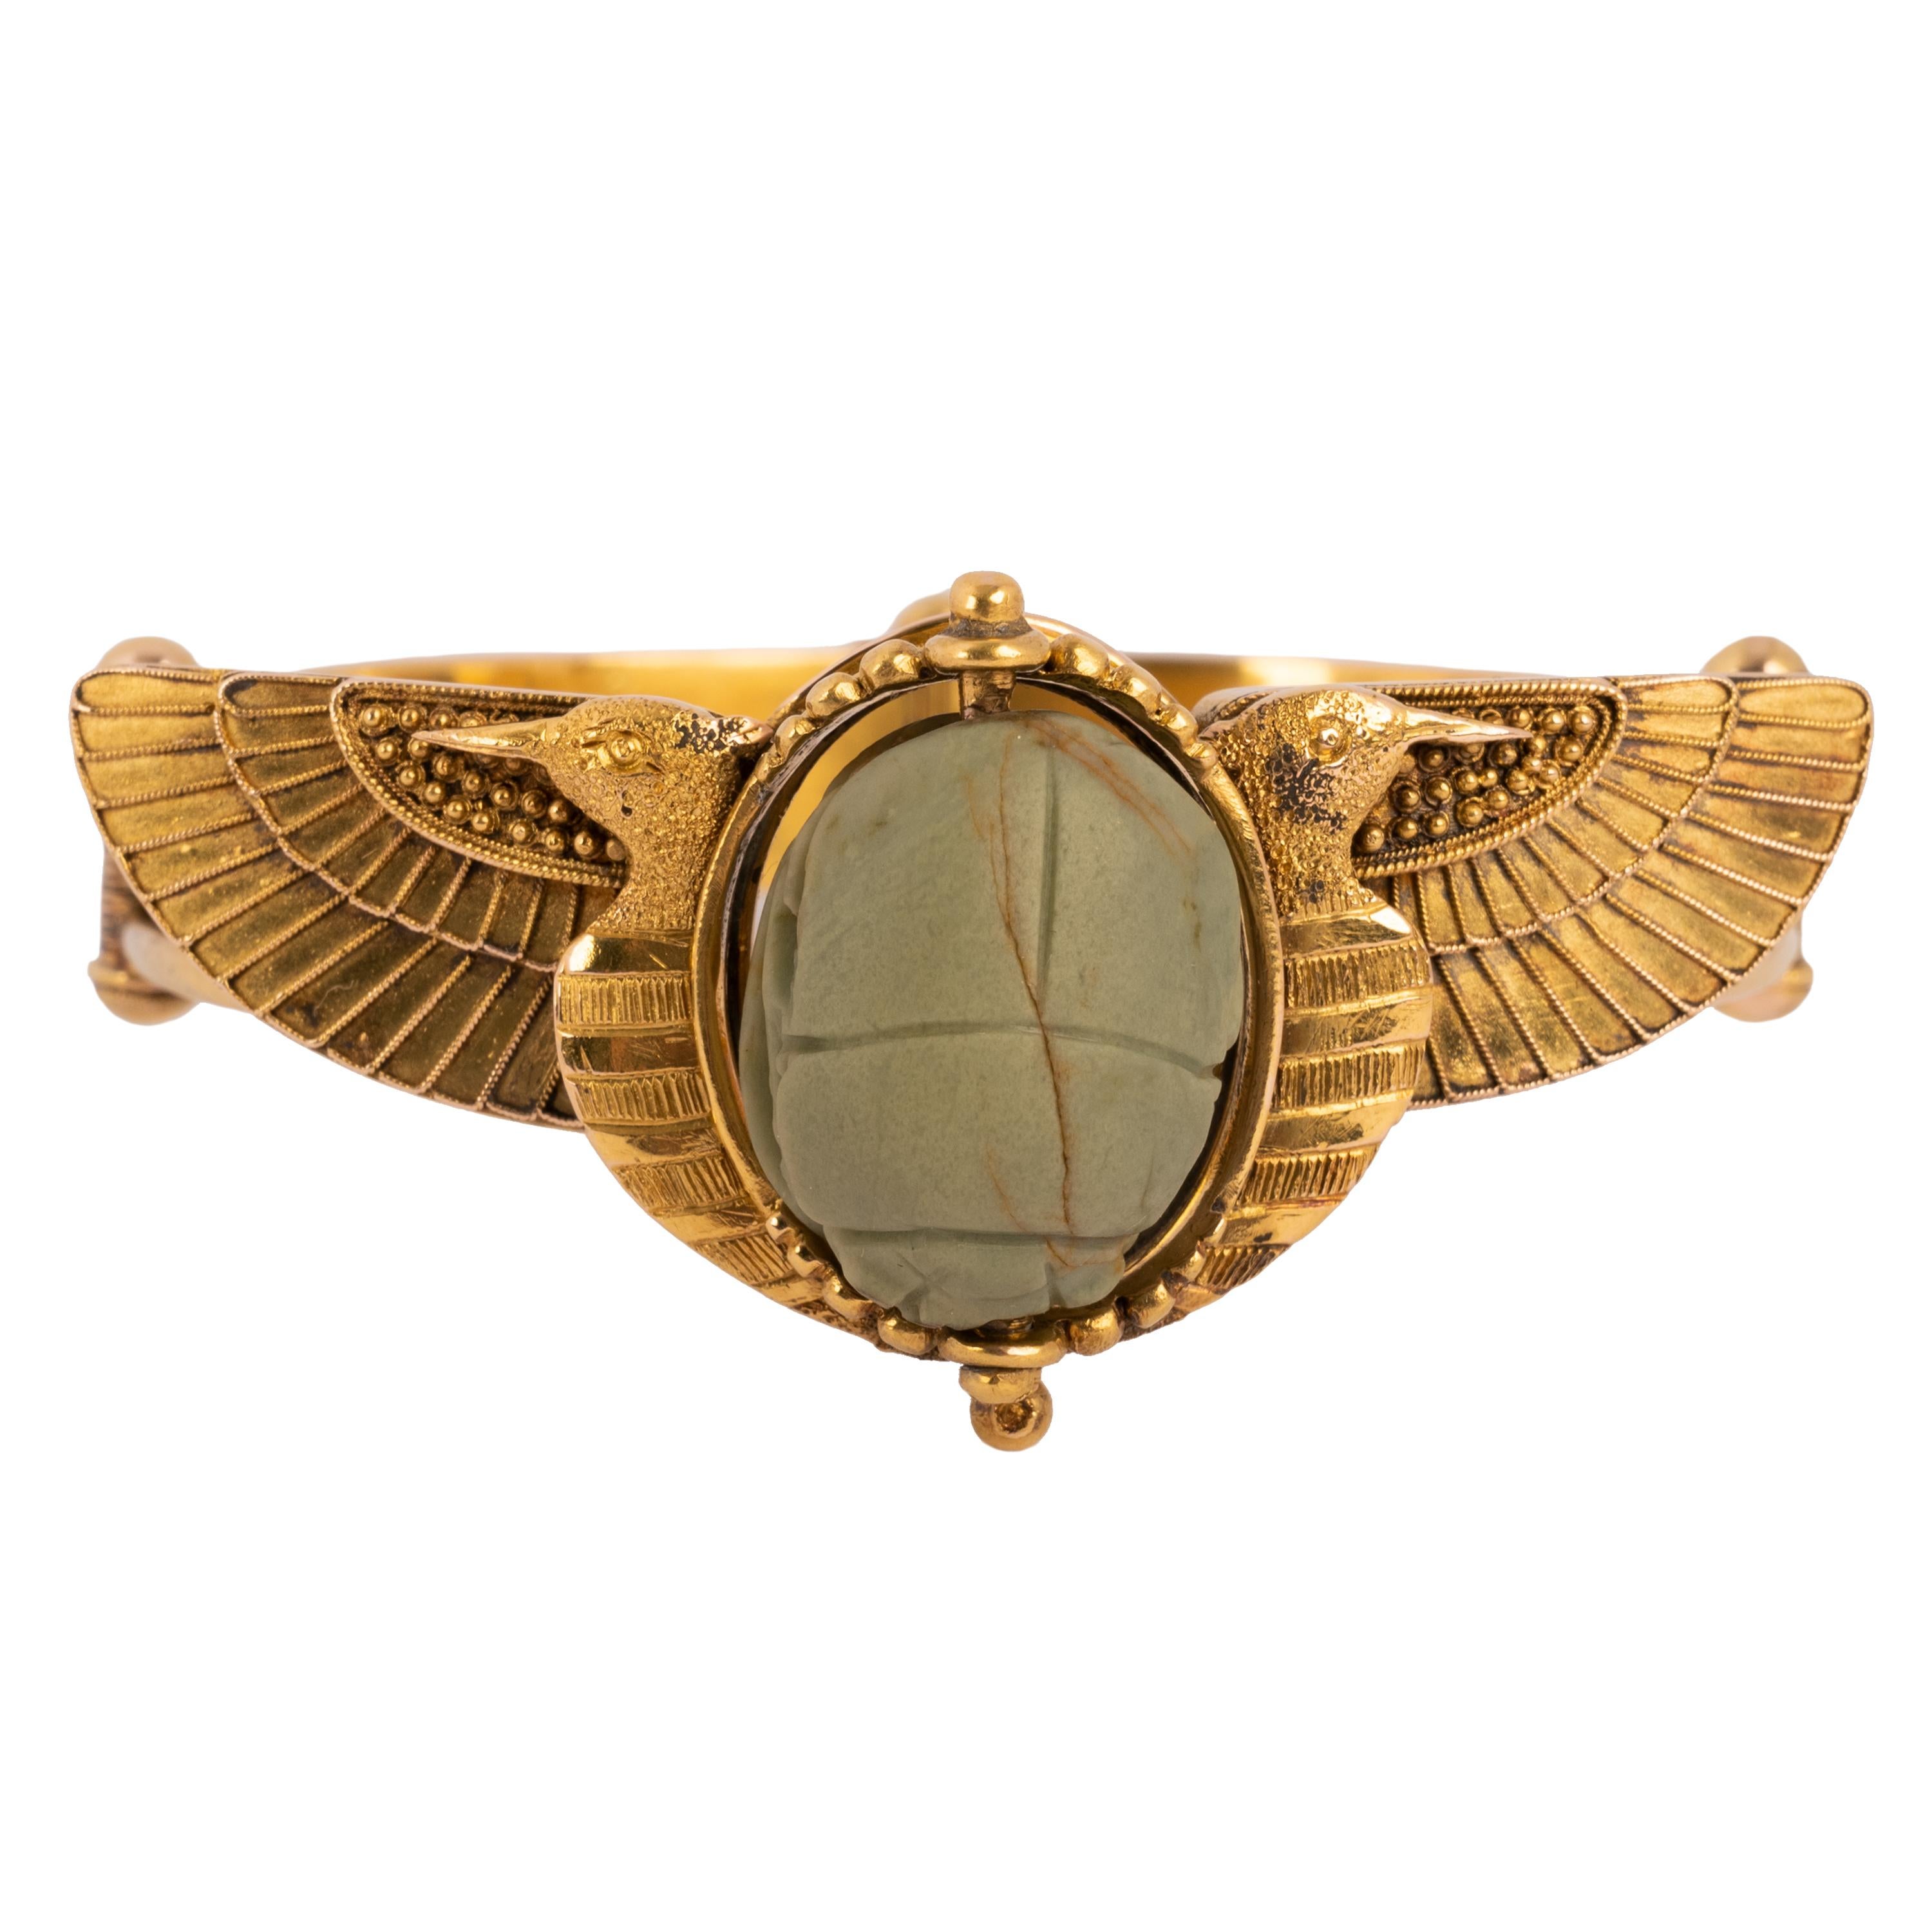 A rare antique Egyptian Revival 22 karat gold bracelet, circa 1870. Gold weight 38.10 grams.
This continental gold bracelet tests as 22 karat gold and is fitted with a green faience ancient Egyptian scarab, engraved with Hieroglyphics. The front of